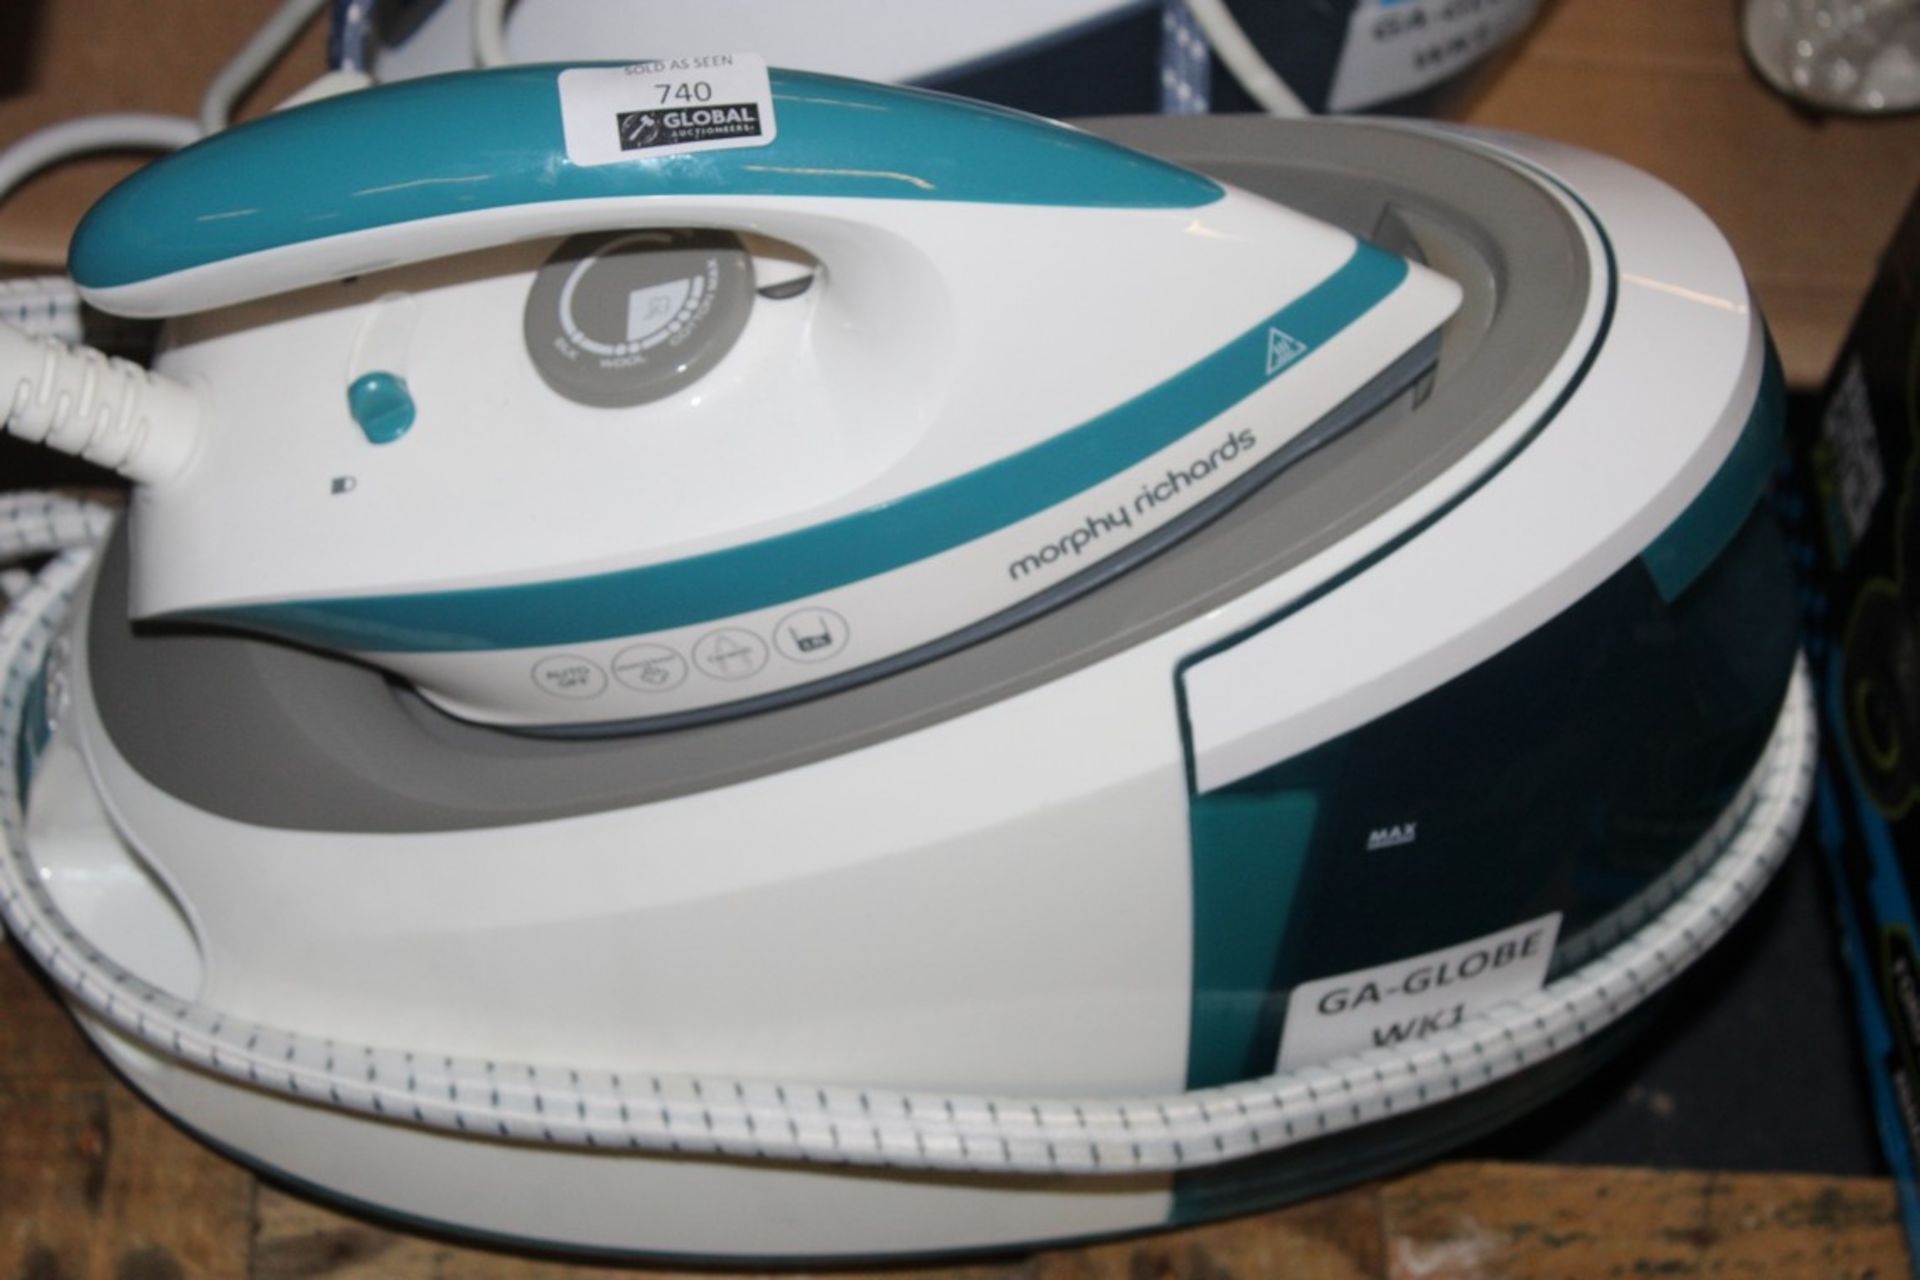 Un-Boxed Morphie Richards STEAM Iron,RRP£190.00 (Customer-Return-Not-Tested) (Public Viewing and